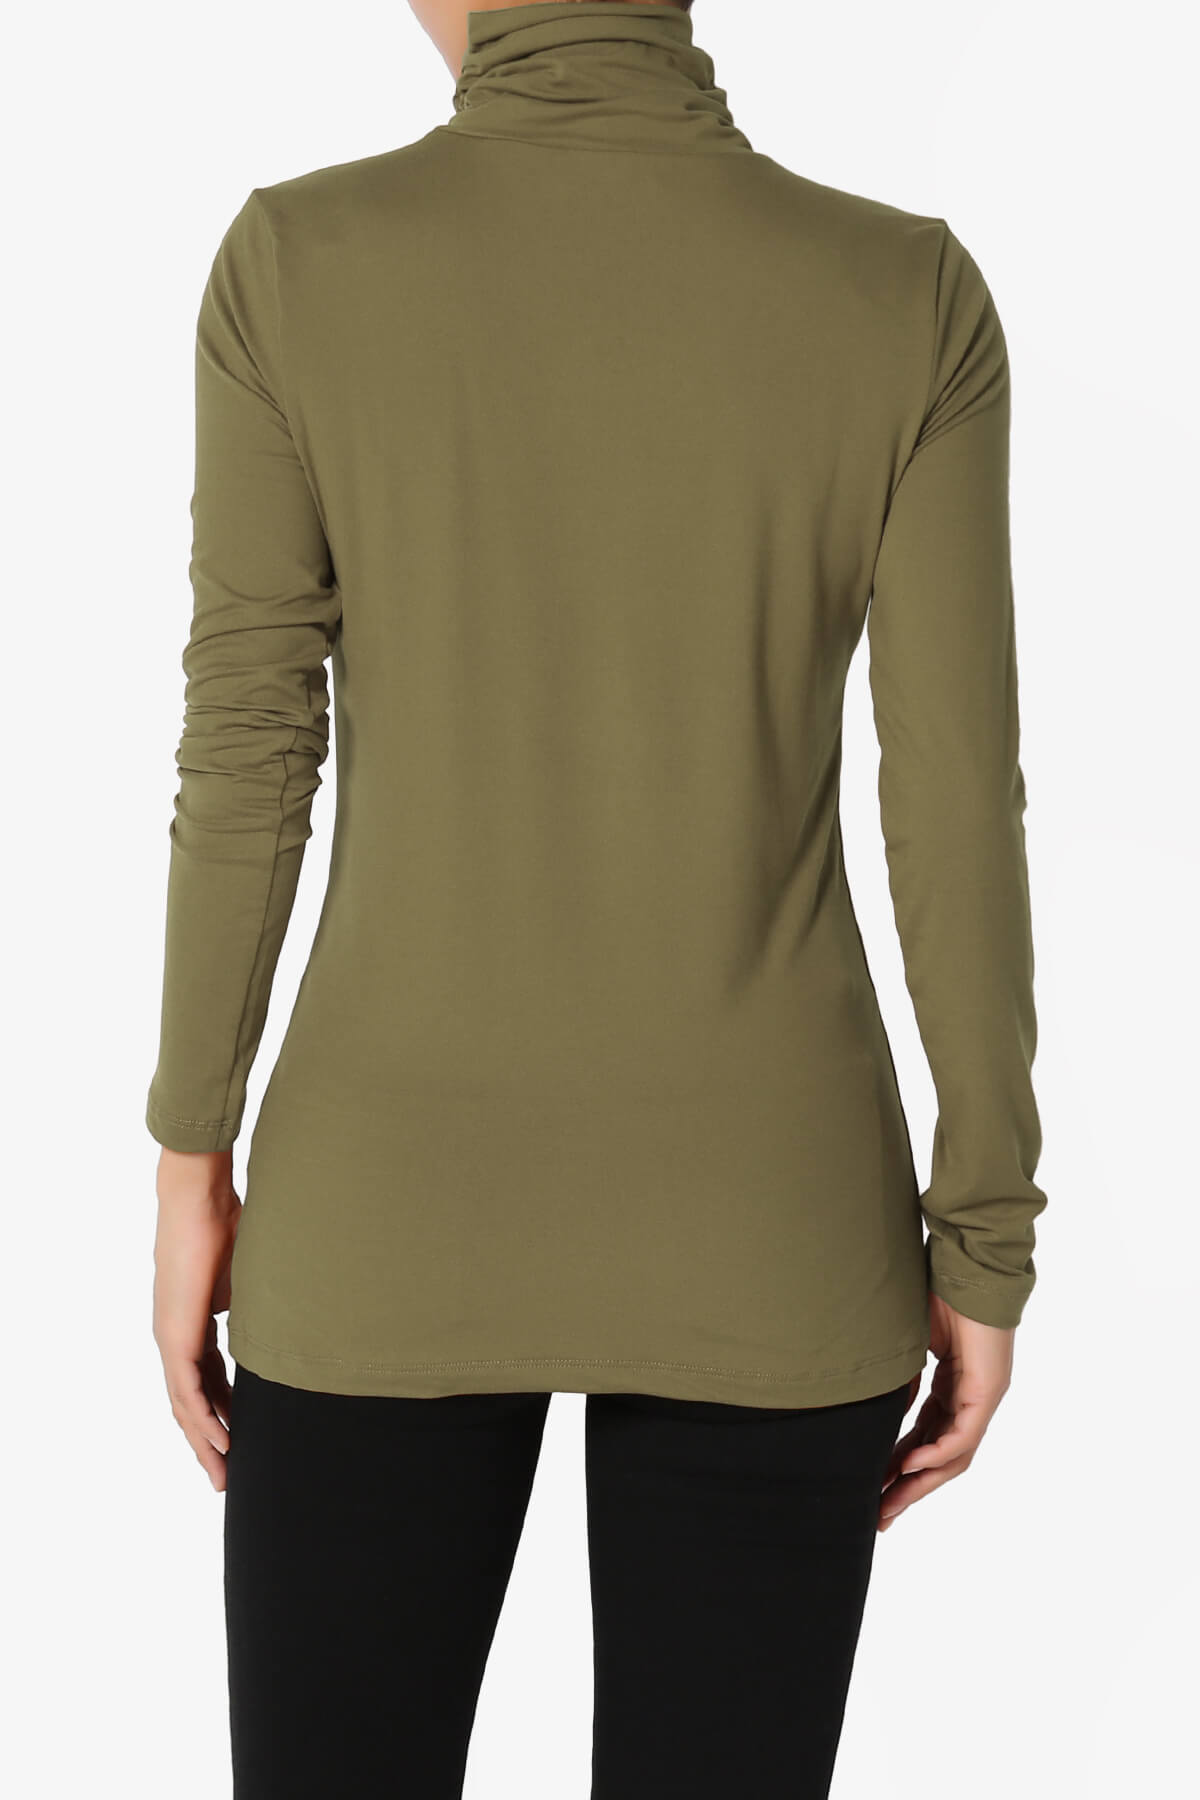 Load image into Gallery viewer, Viable Ruched Turtle Neck Long Sleeve Top OLIVE KHAKI_2
